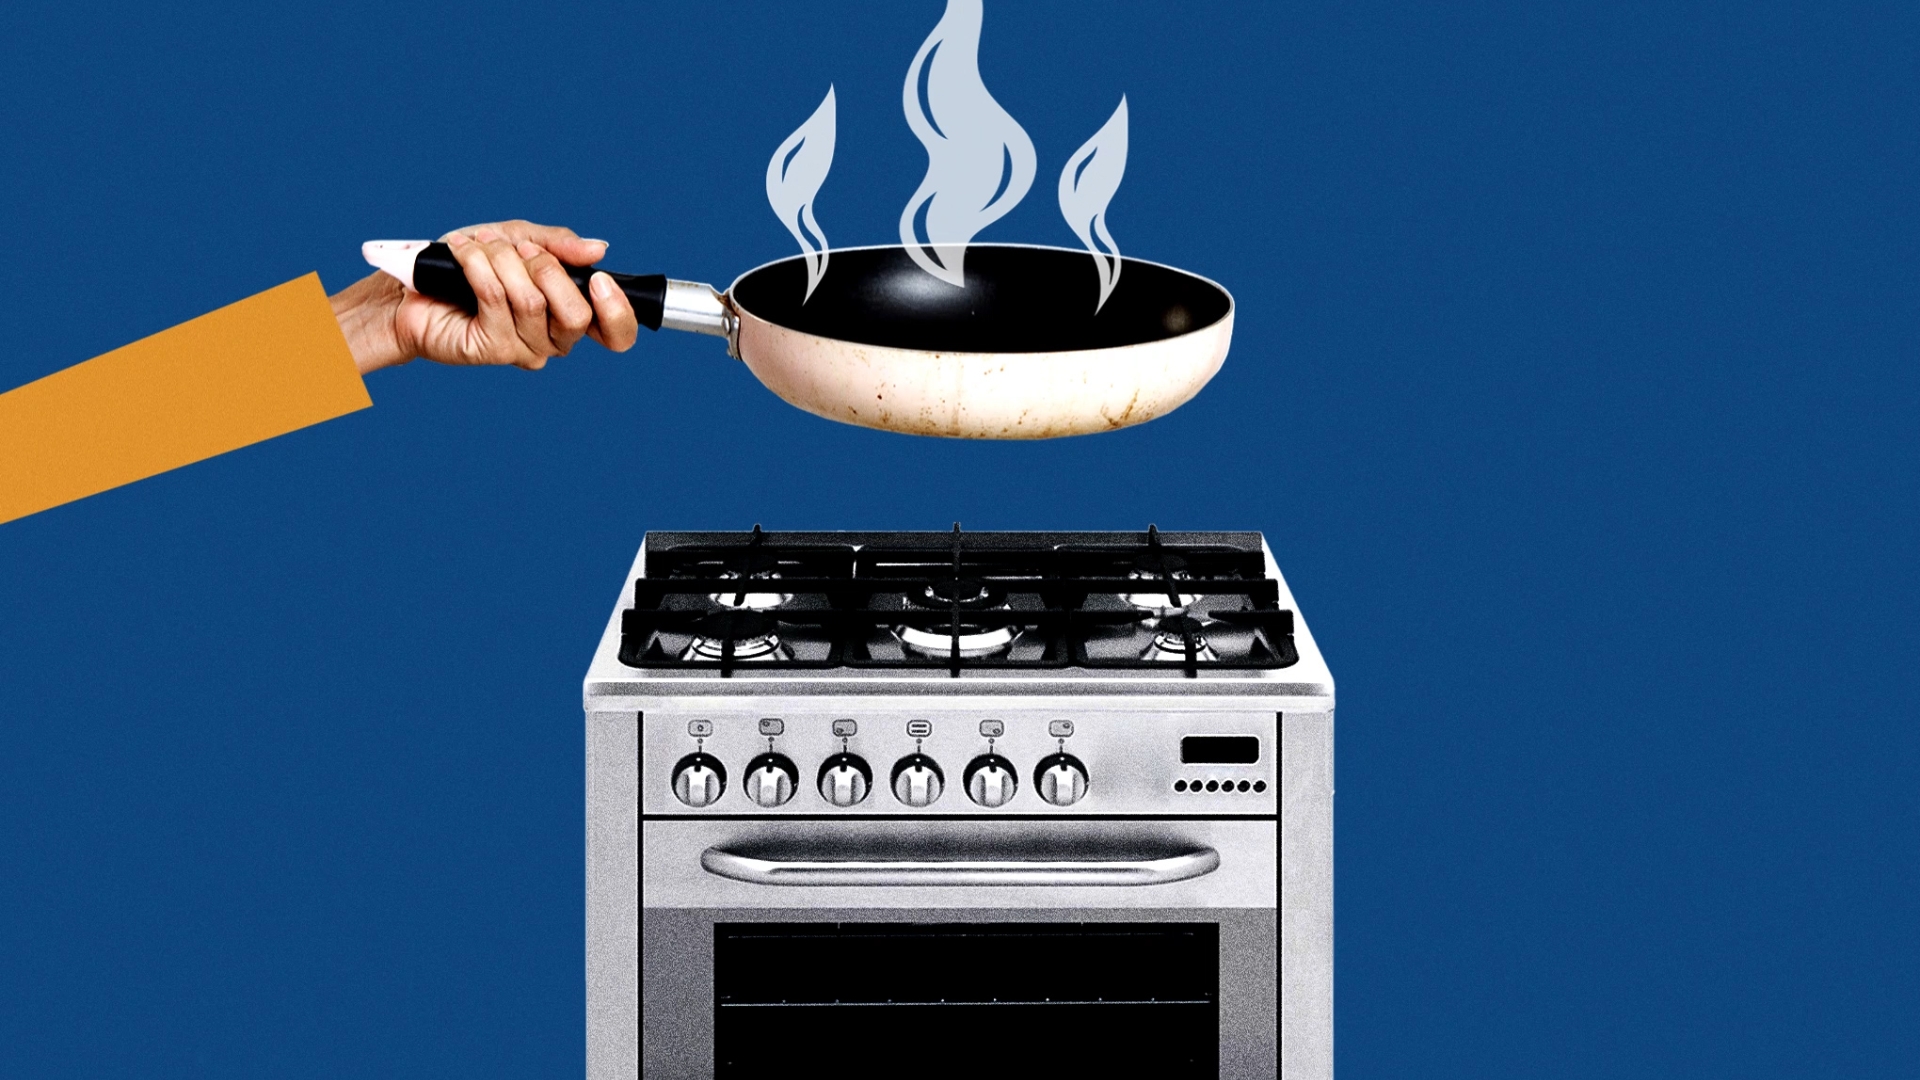 How to cook safely if you're stuck with a gas stove - The